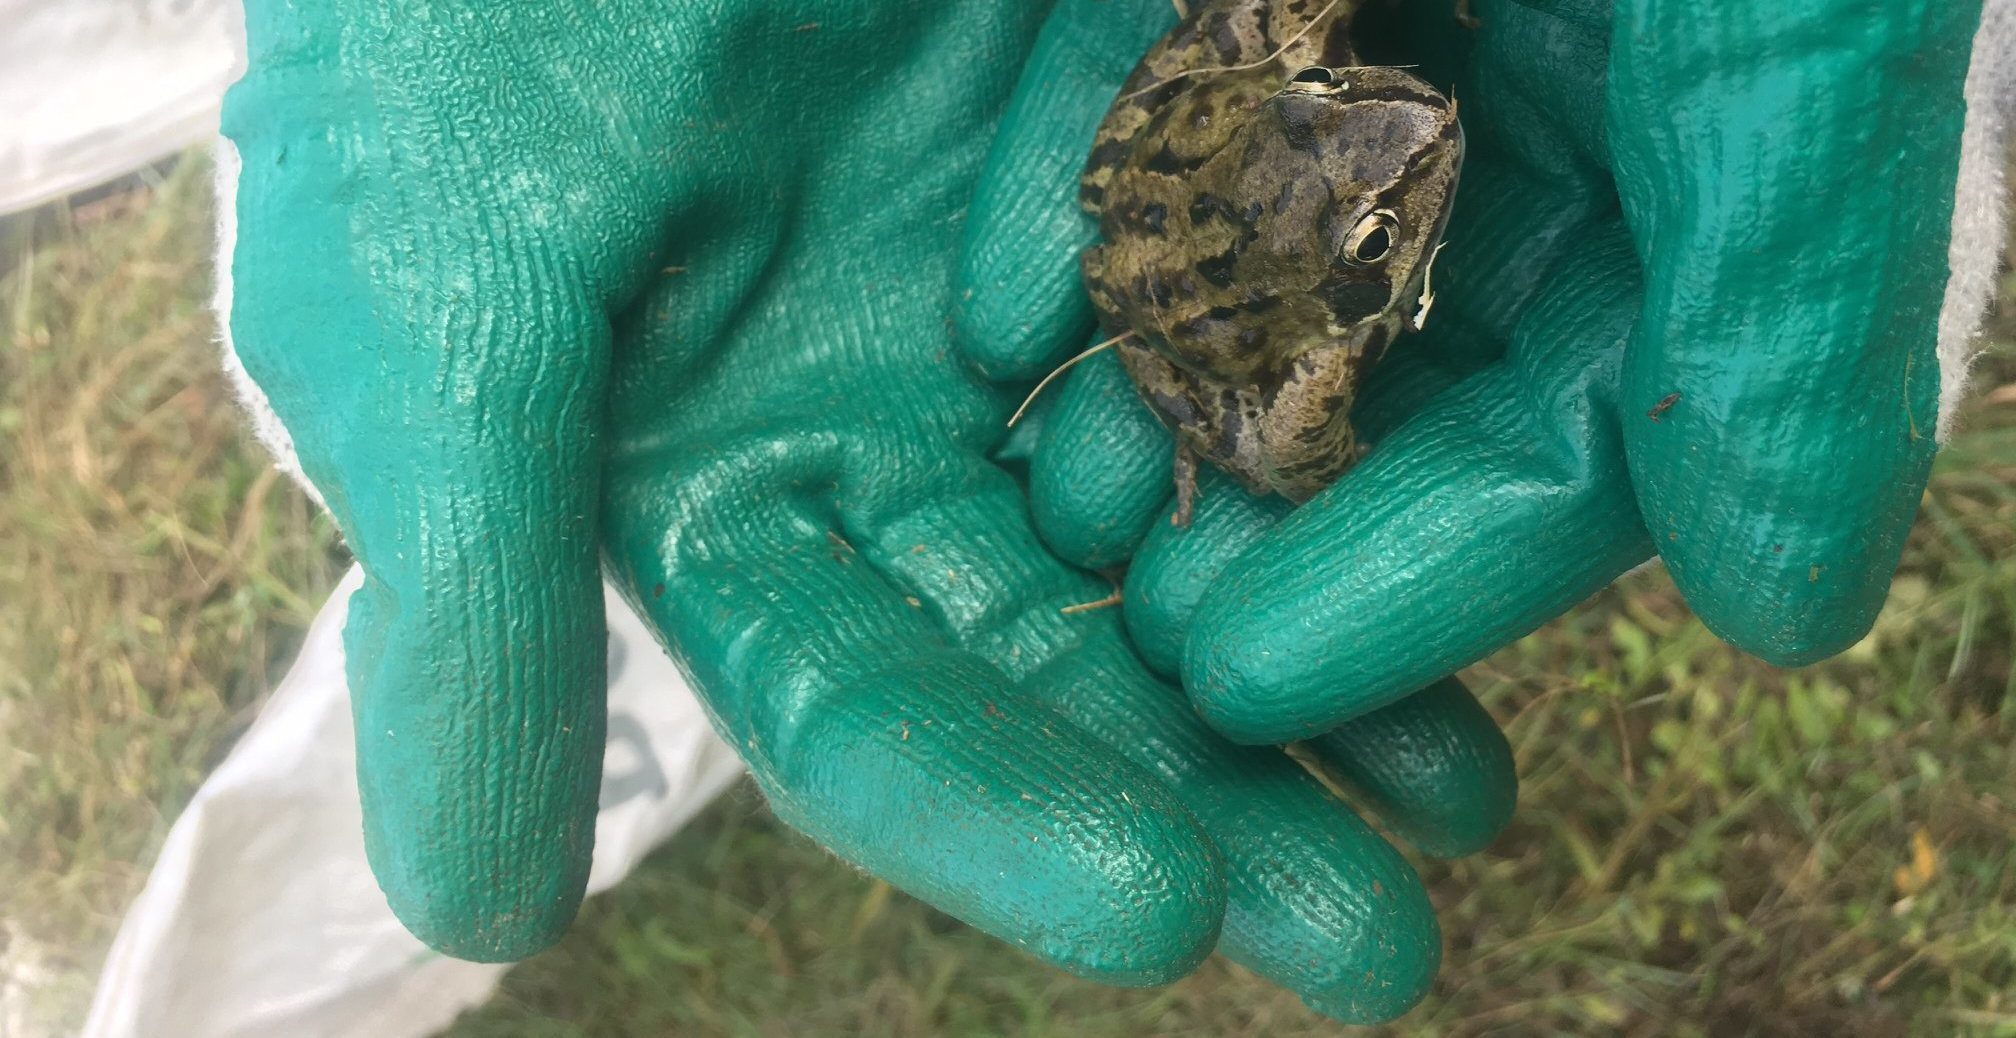 A photo of someone holding a frog in their hands